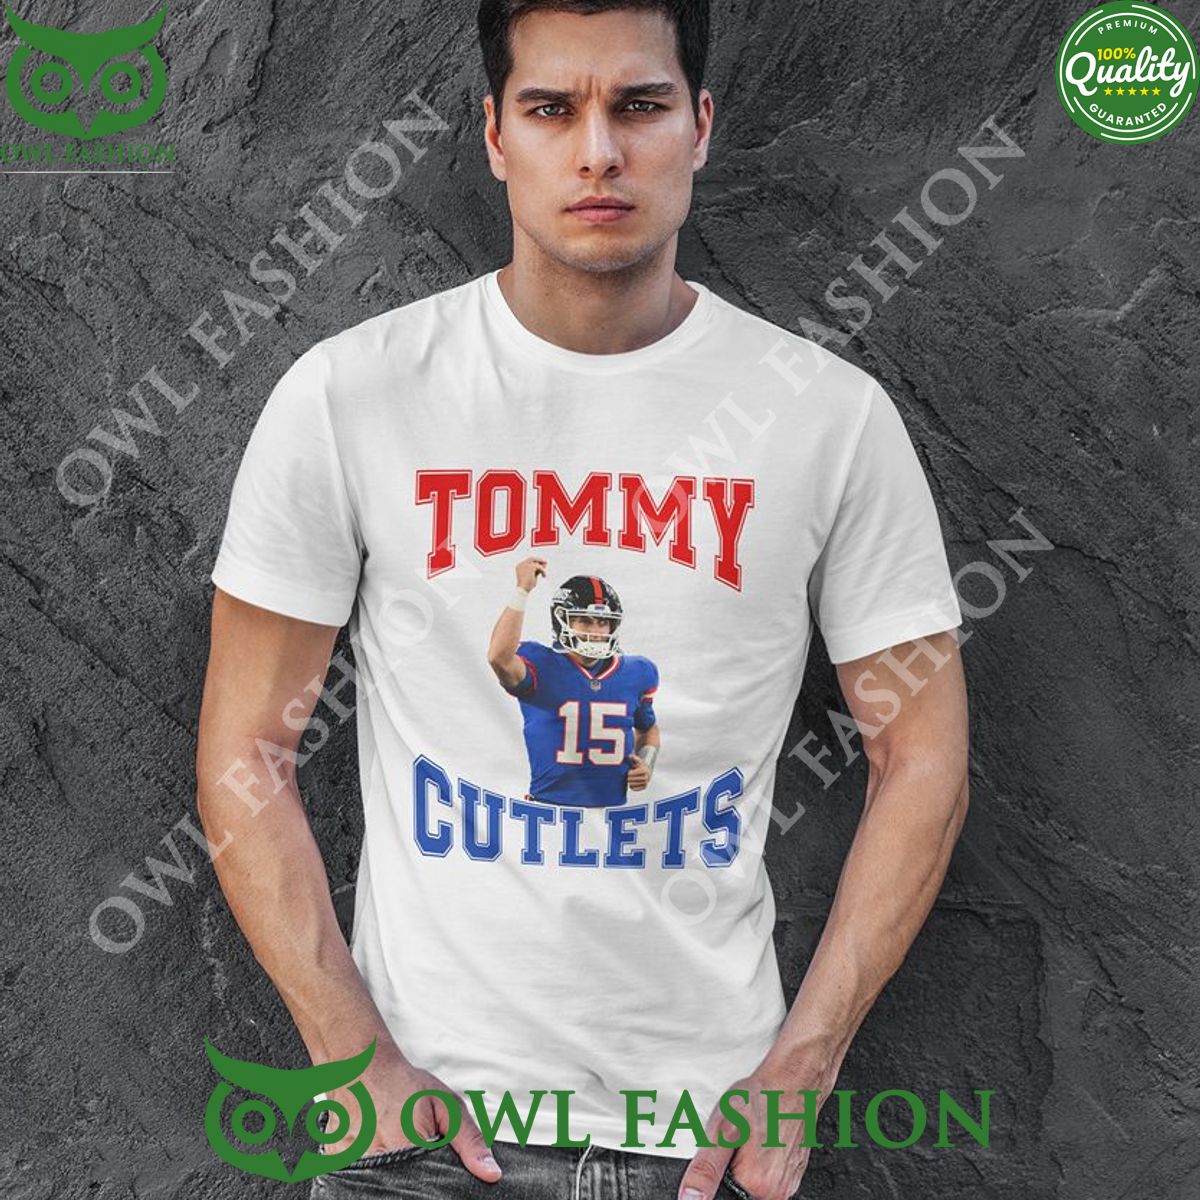 Tommy Cutlets Italian Hand Gesture Shirt Tommy DeVito NY Giants T-Shirt